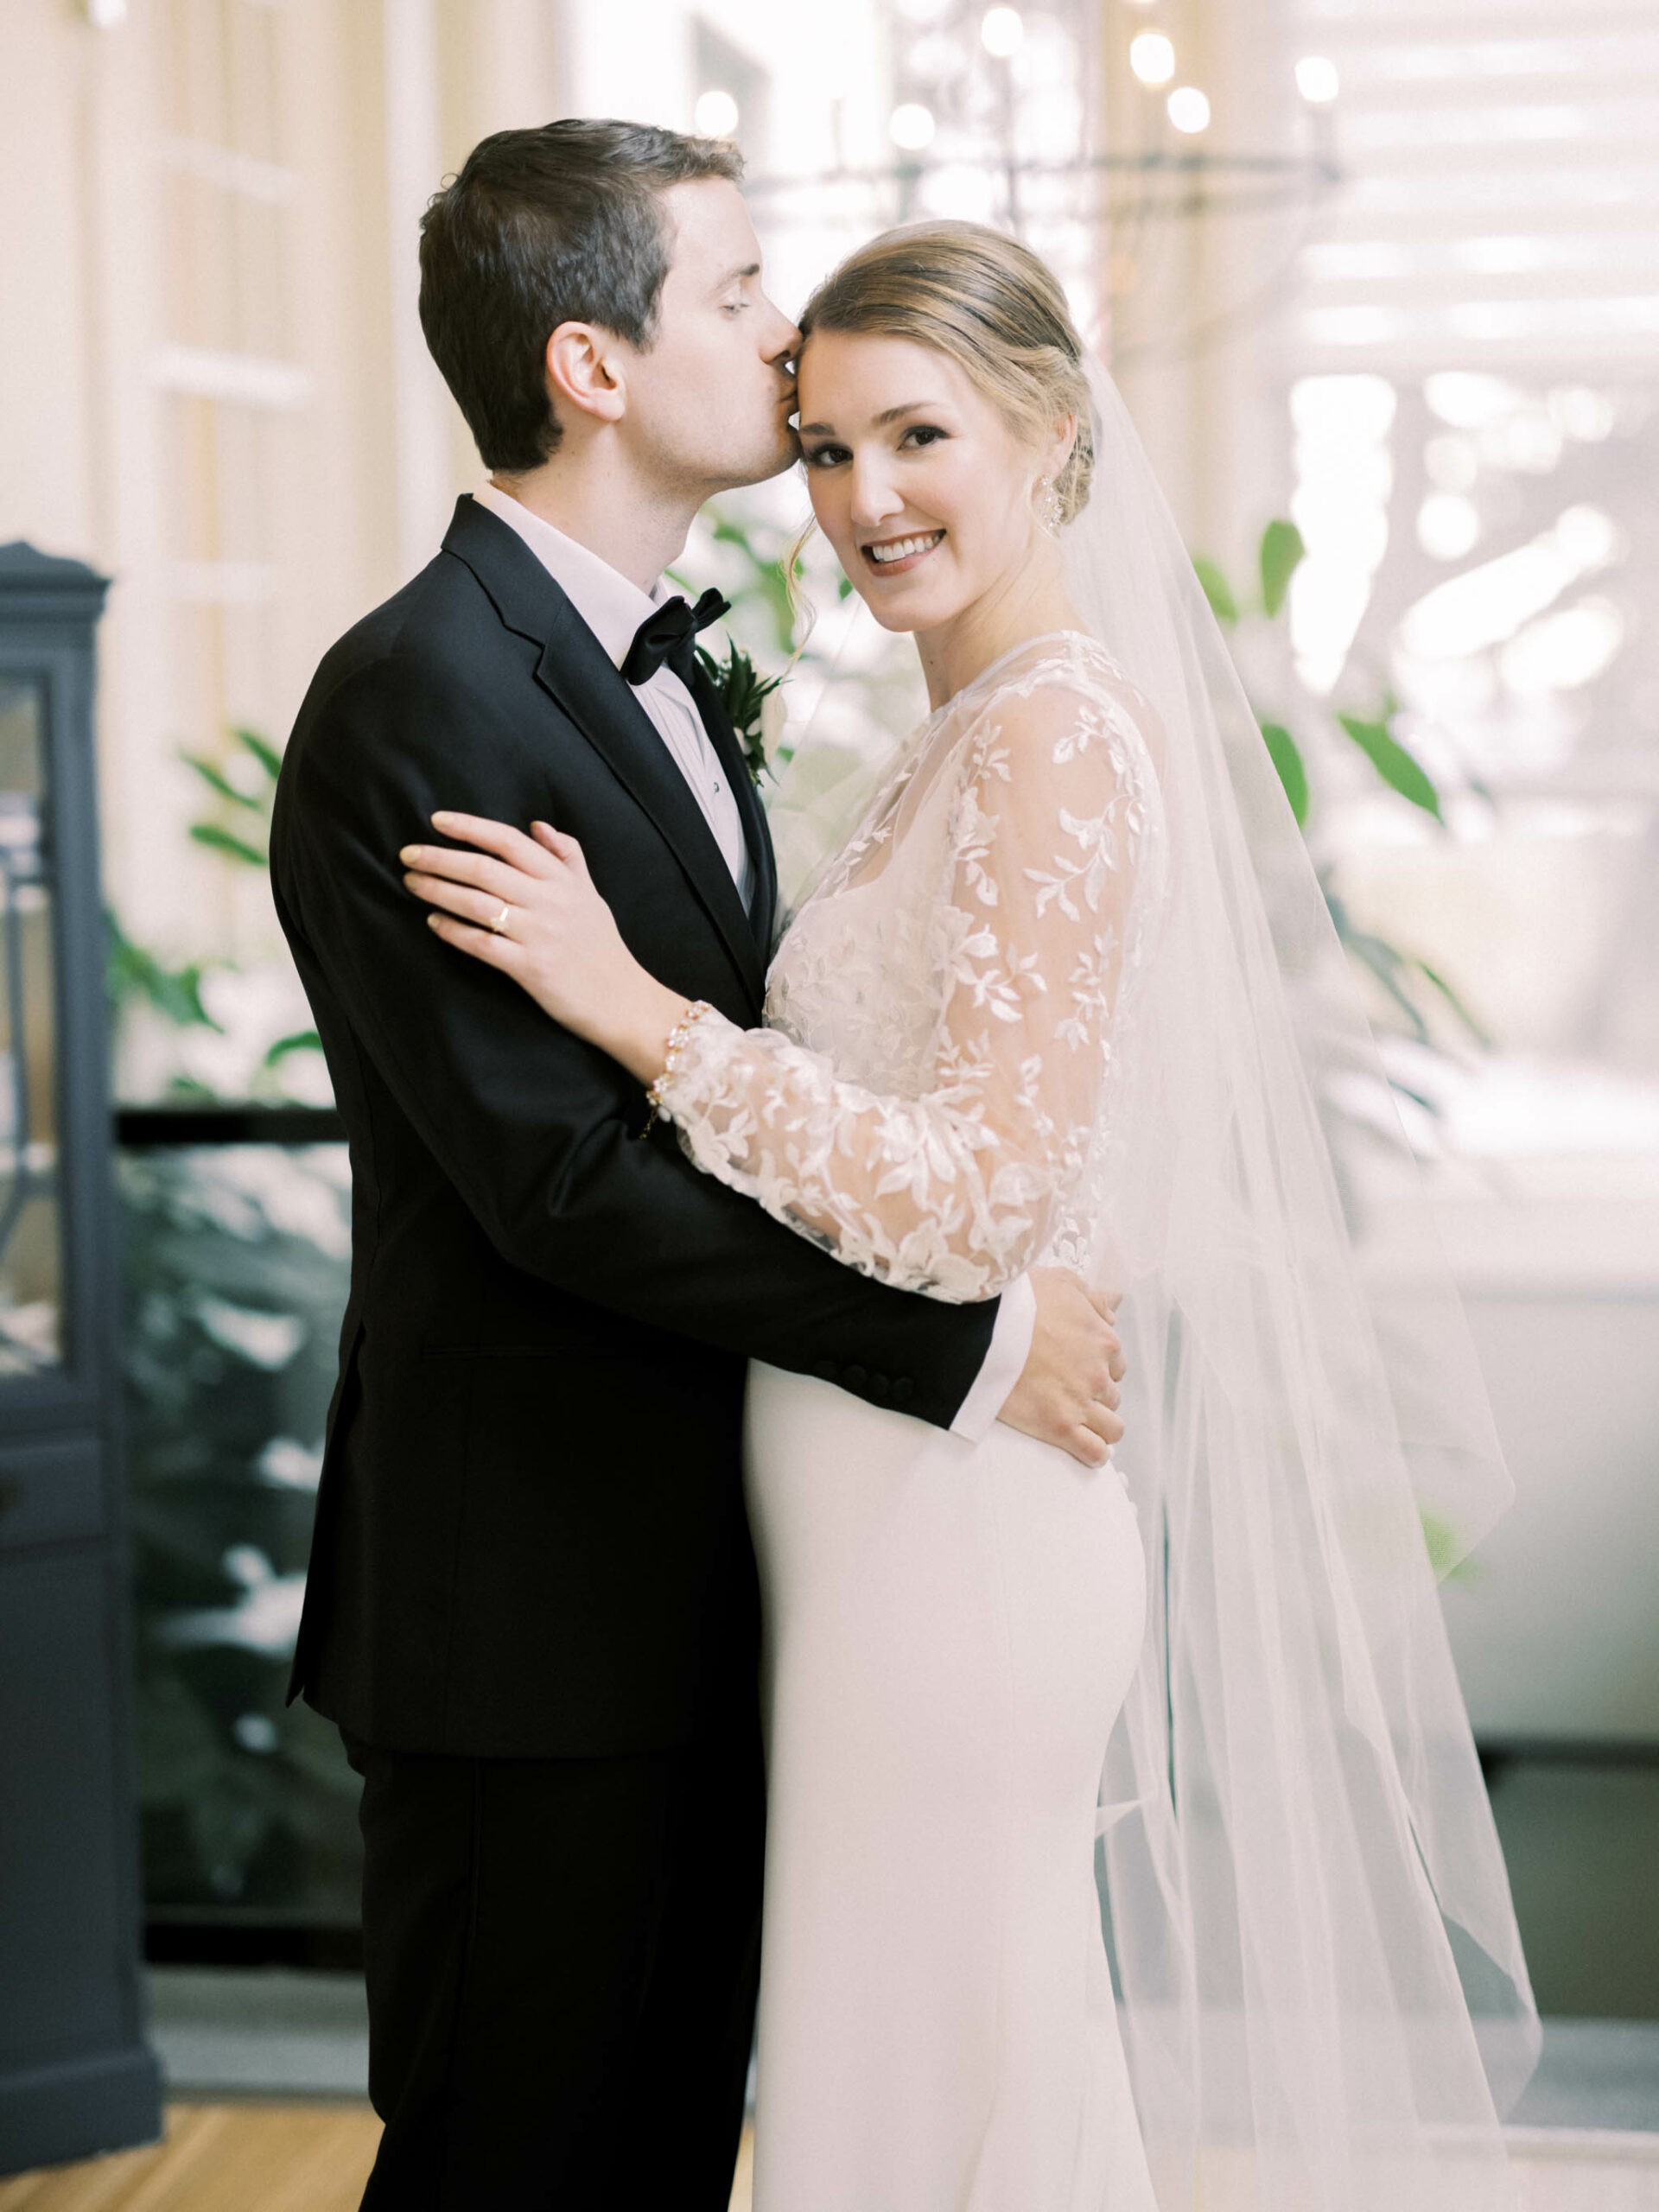 How to confidently prepare for bad weather on your wedding day, film wedding photographers, film photographer, nicole sarah, couple smiling, lace bolero wedding dress, lace sleeve gown